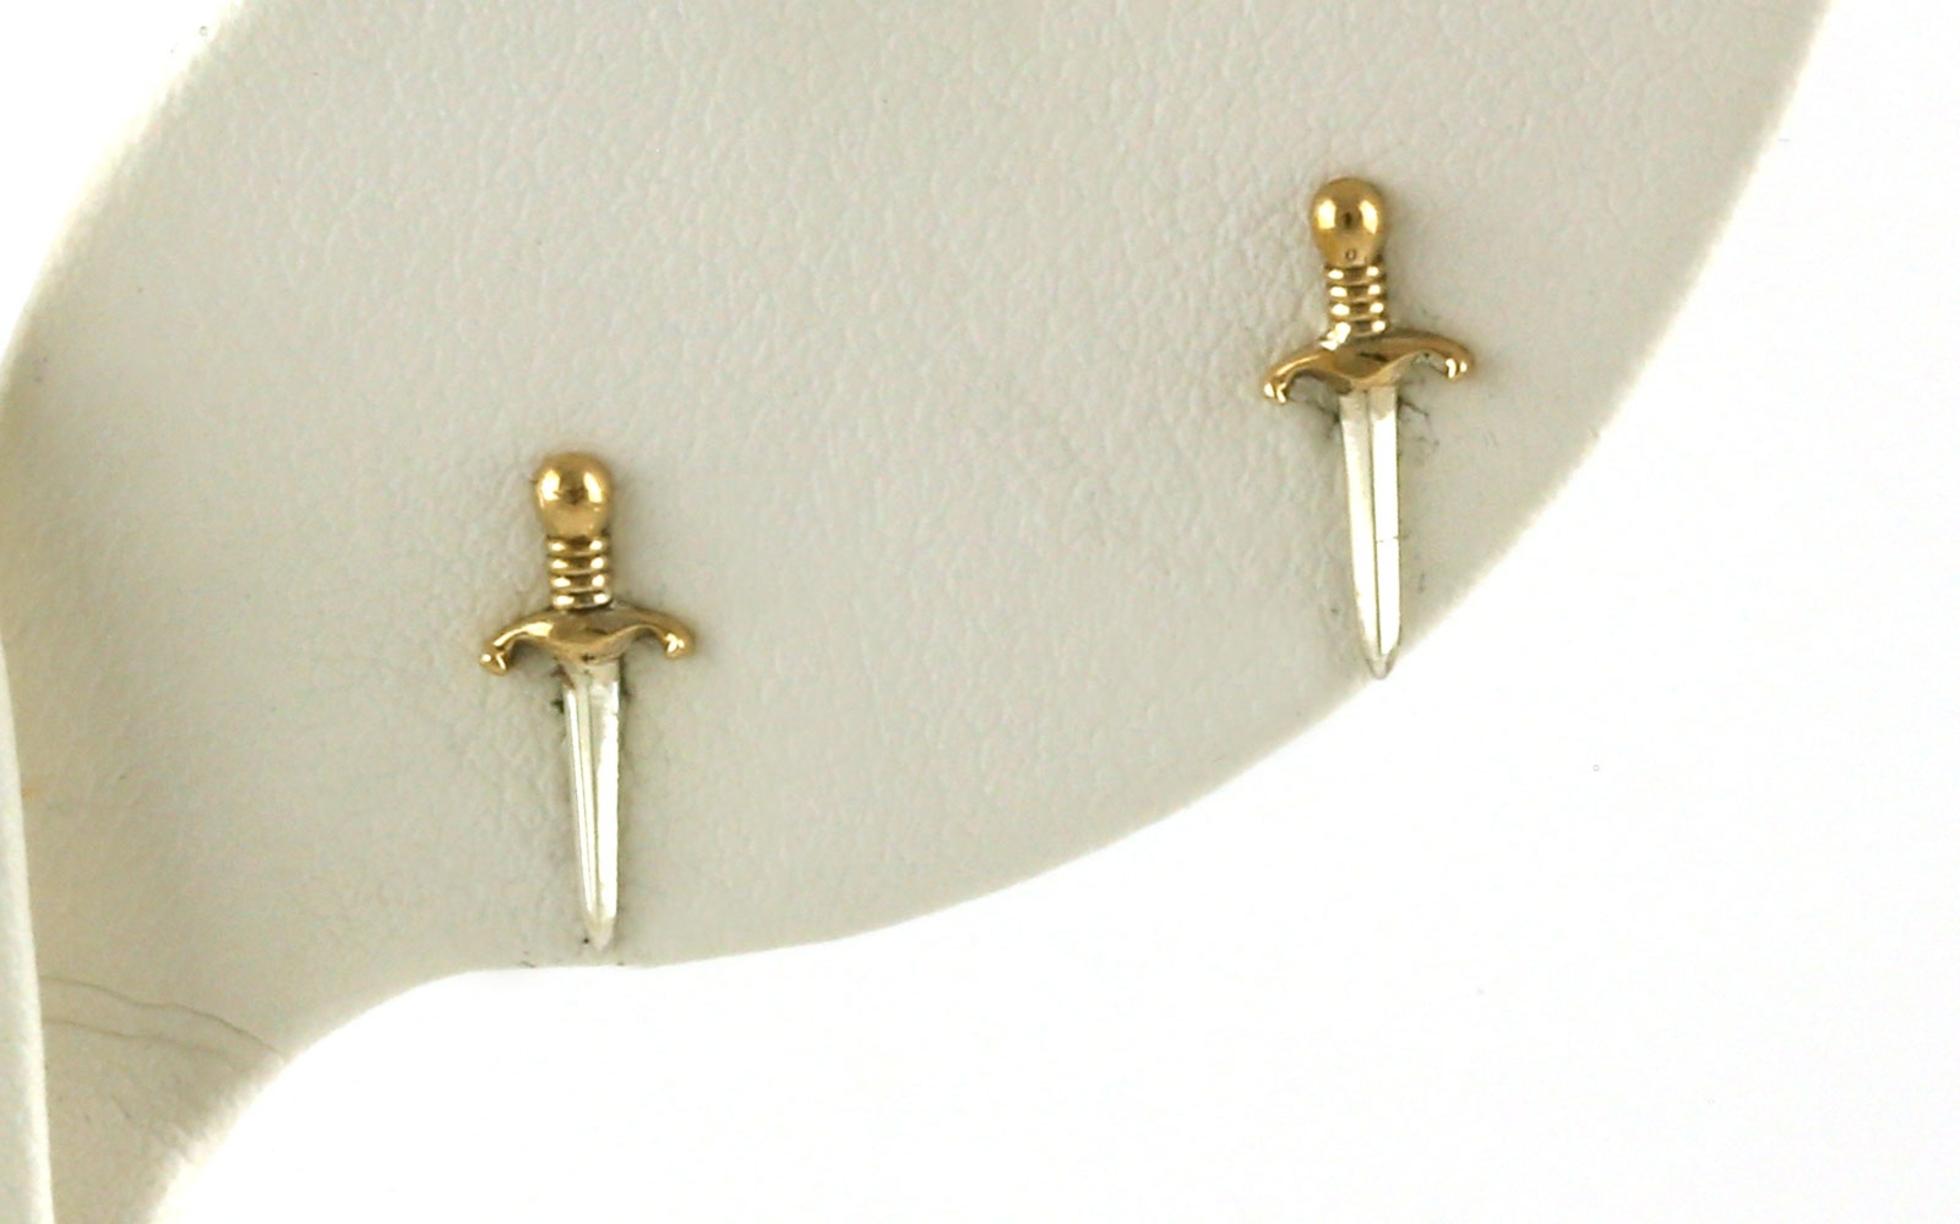 Dagger Stud Earrings in Two-tone Sterling Silver and Bronze